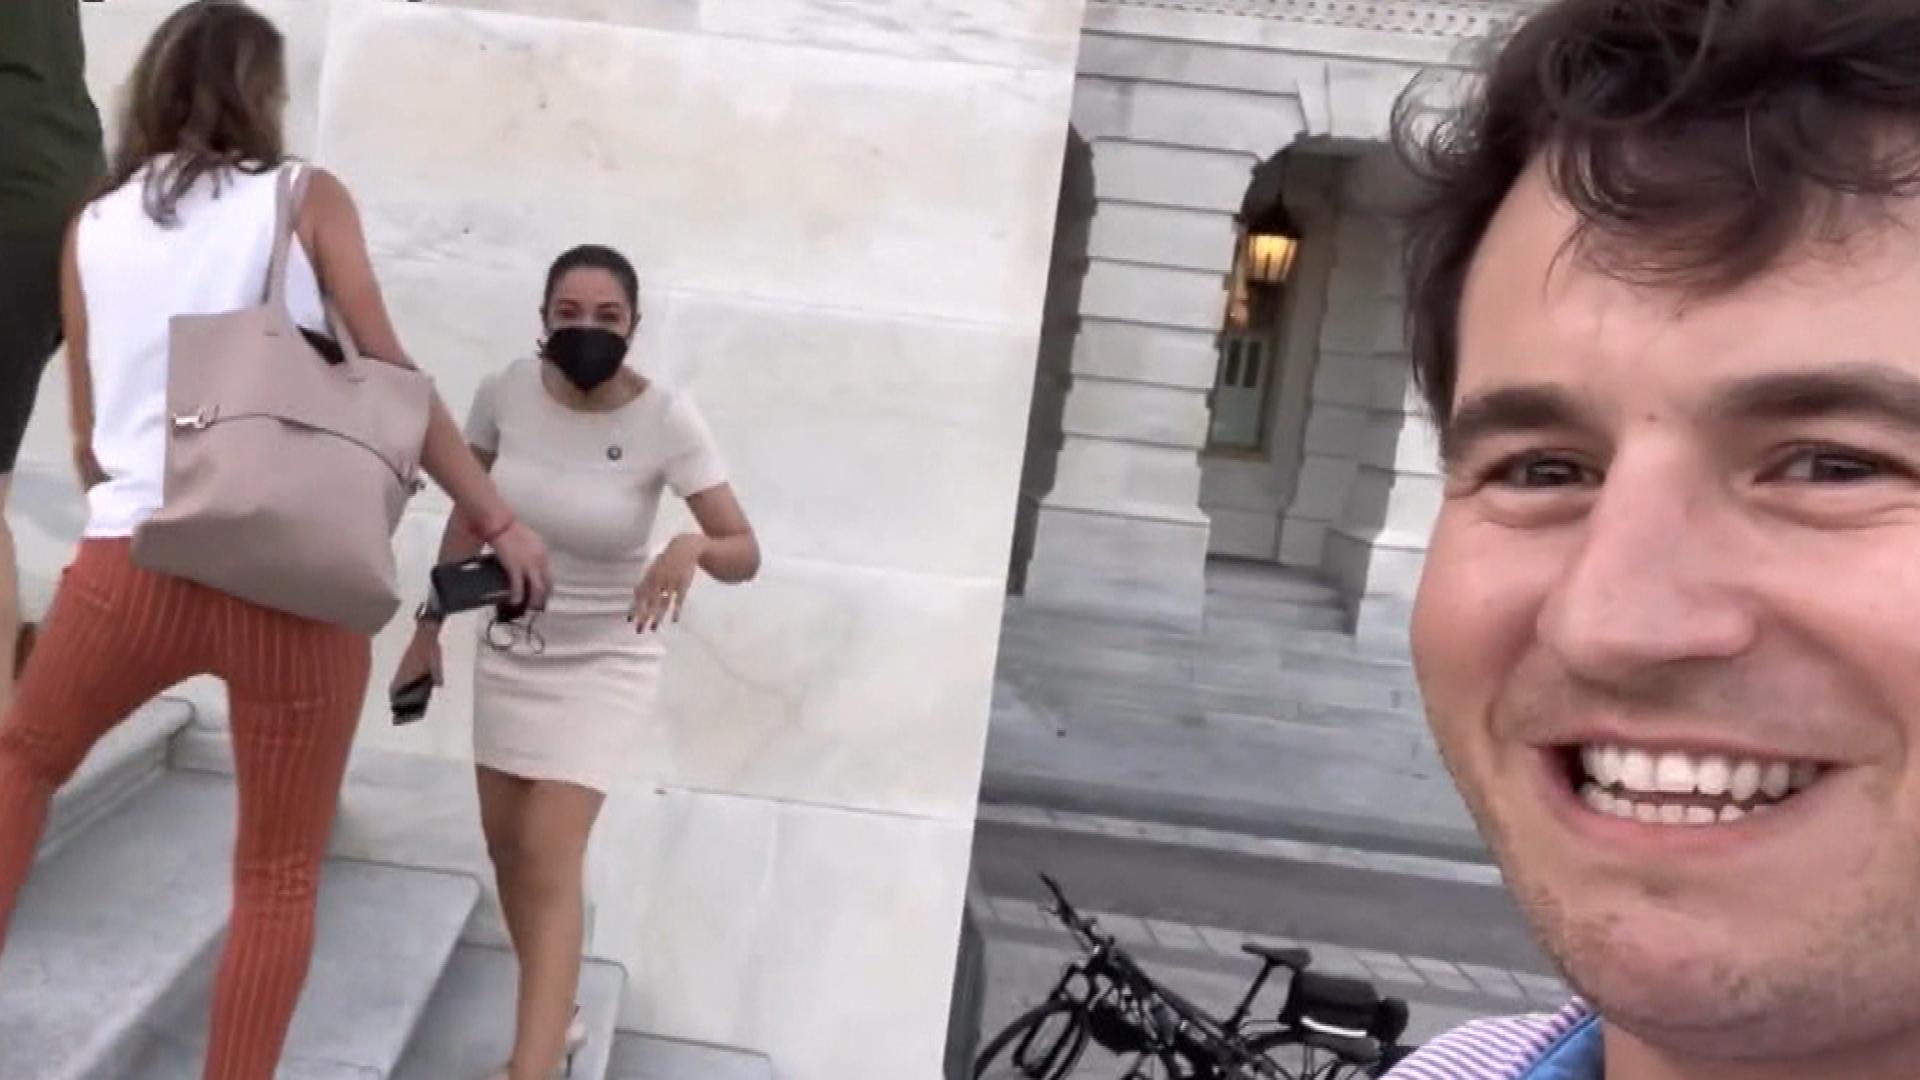 Alexandria OcasioCortez calls out the man who harmed her on Capitol Steps